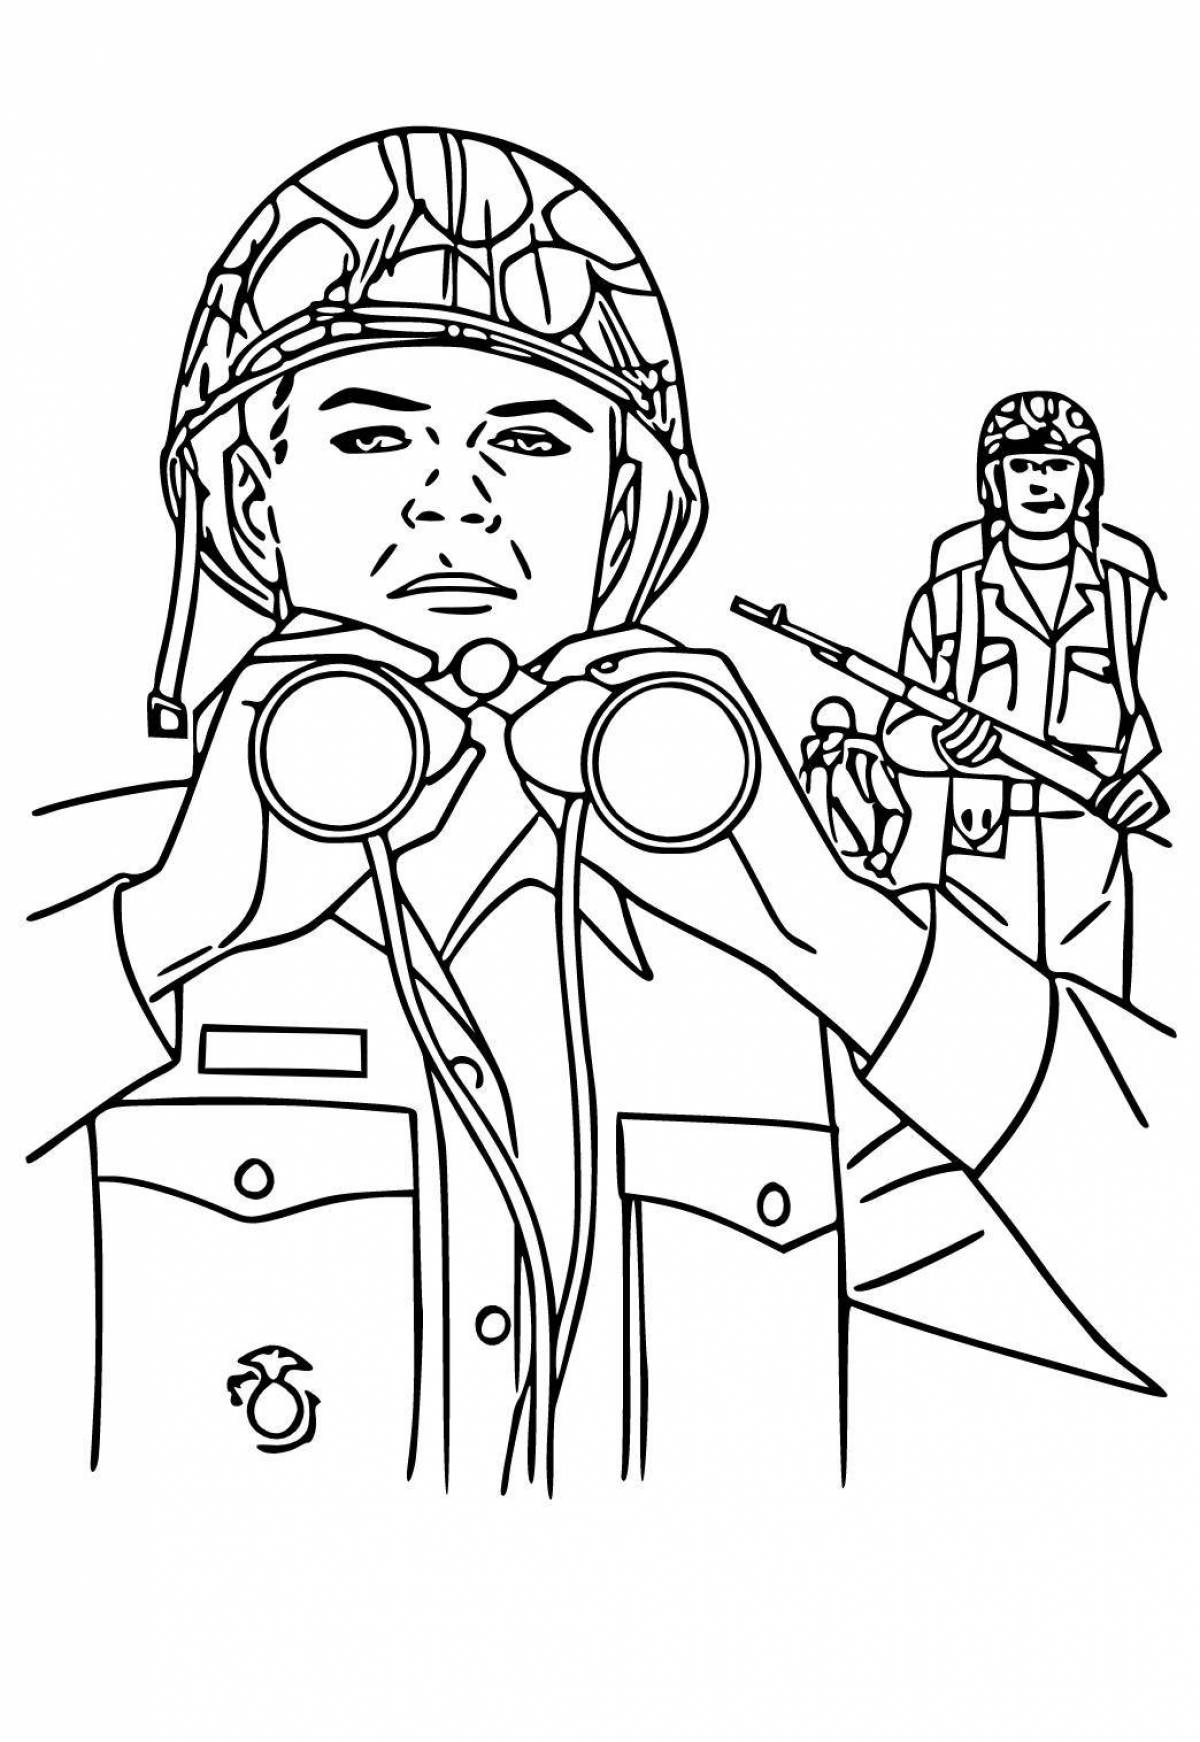 Generous coloring pages heroes of our time